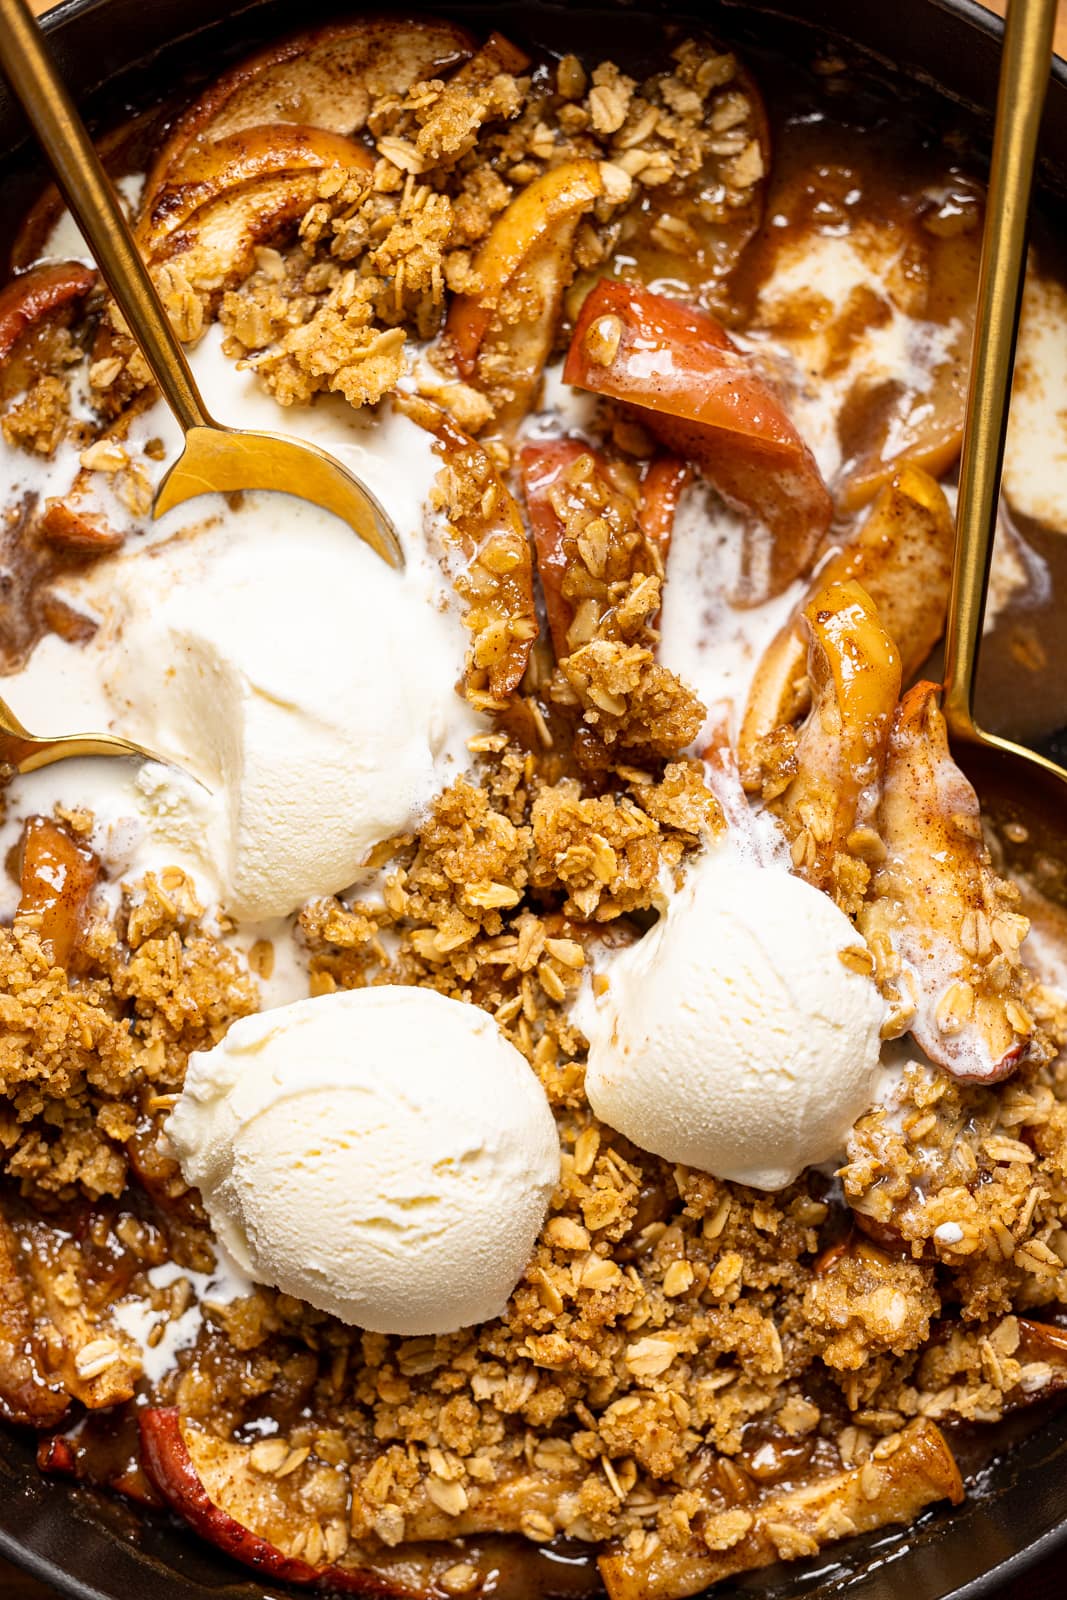 Up close shot of apple crisp with scoops of ice cream and spoons.